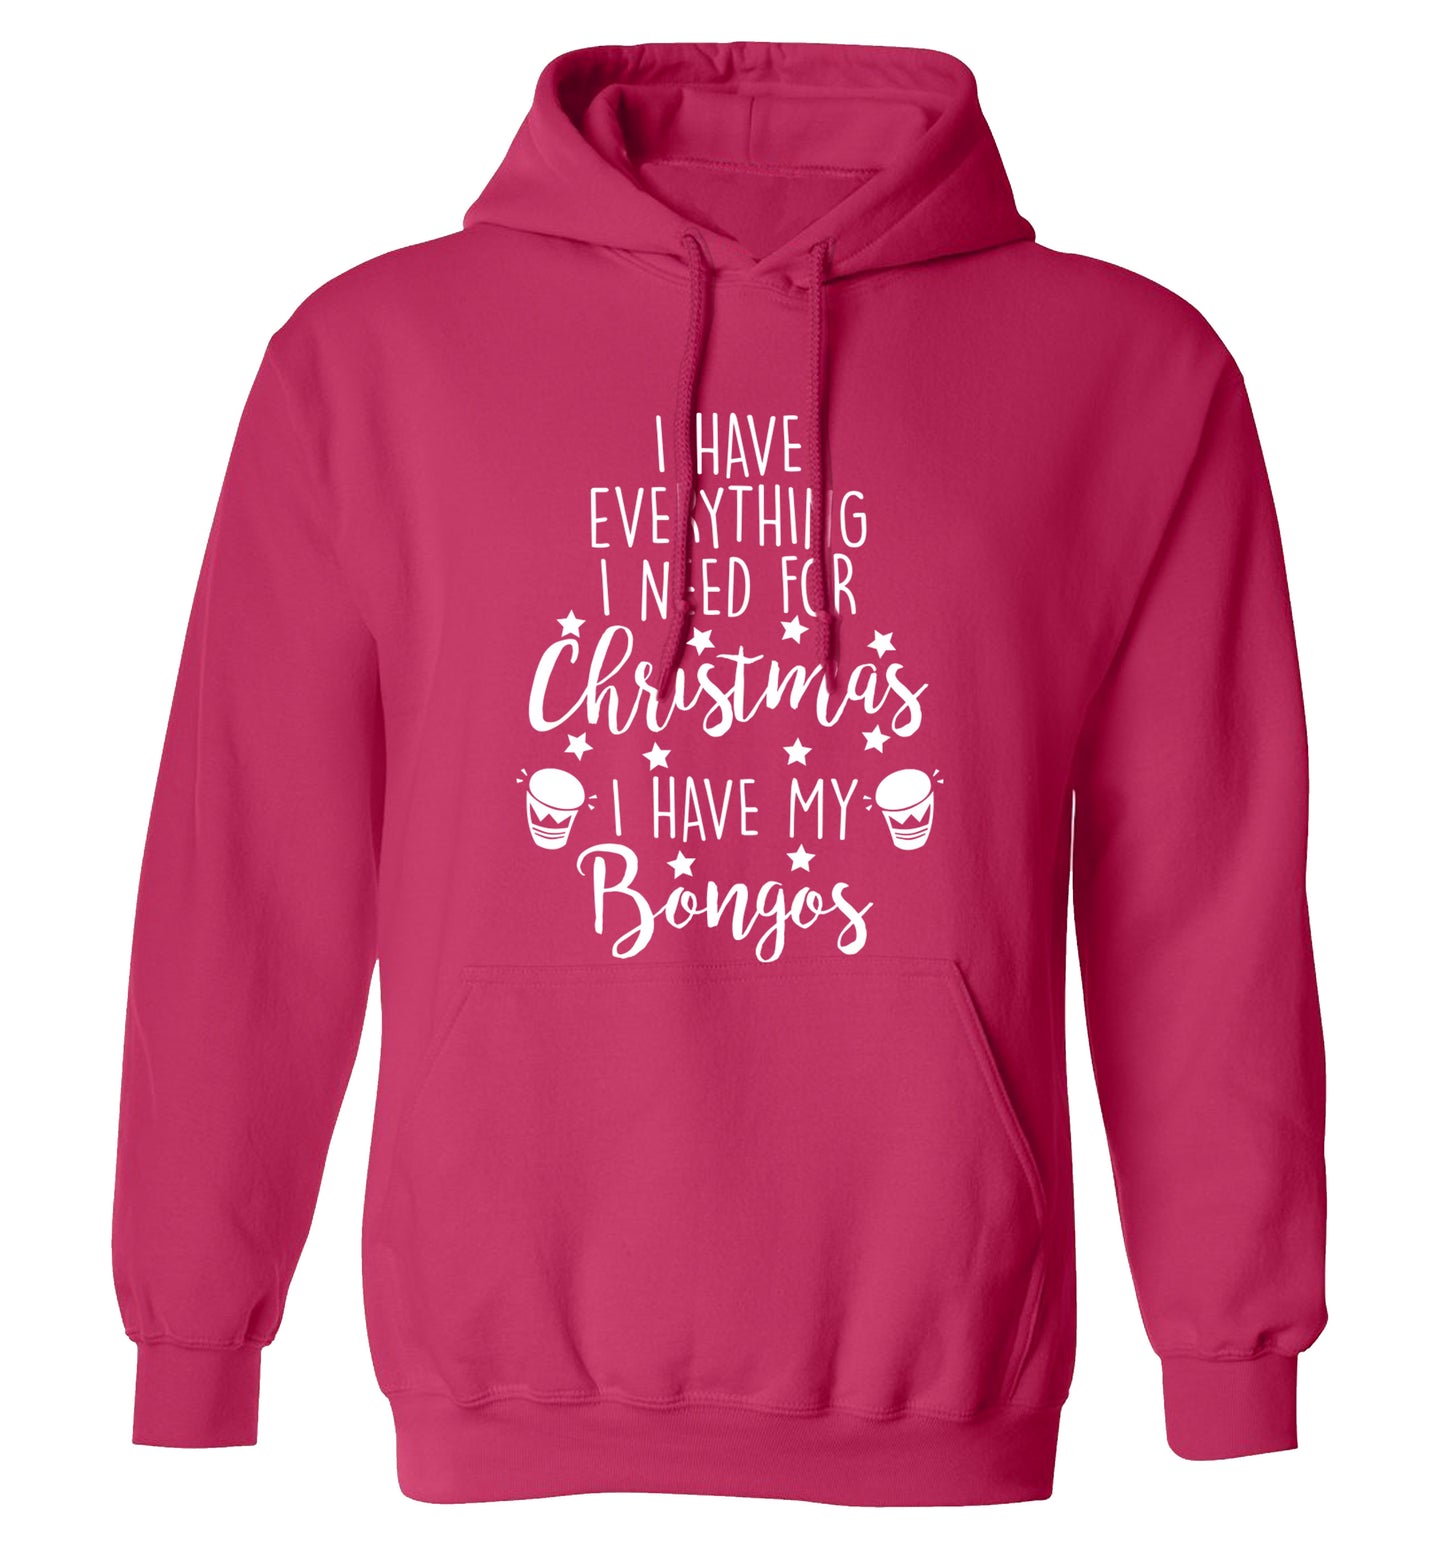 I have everything I need for Christmas I have my bongos! adults unisex pink hoodie 2XL